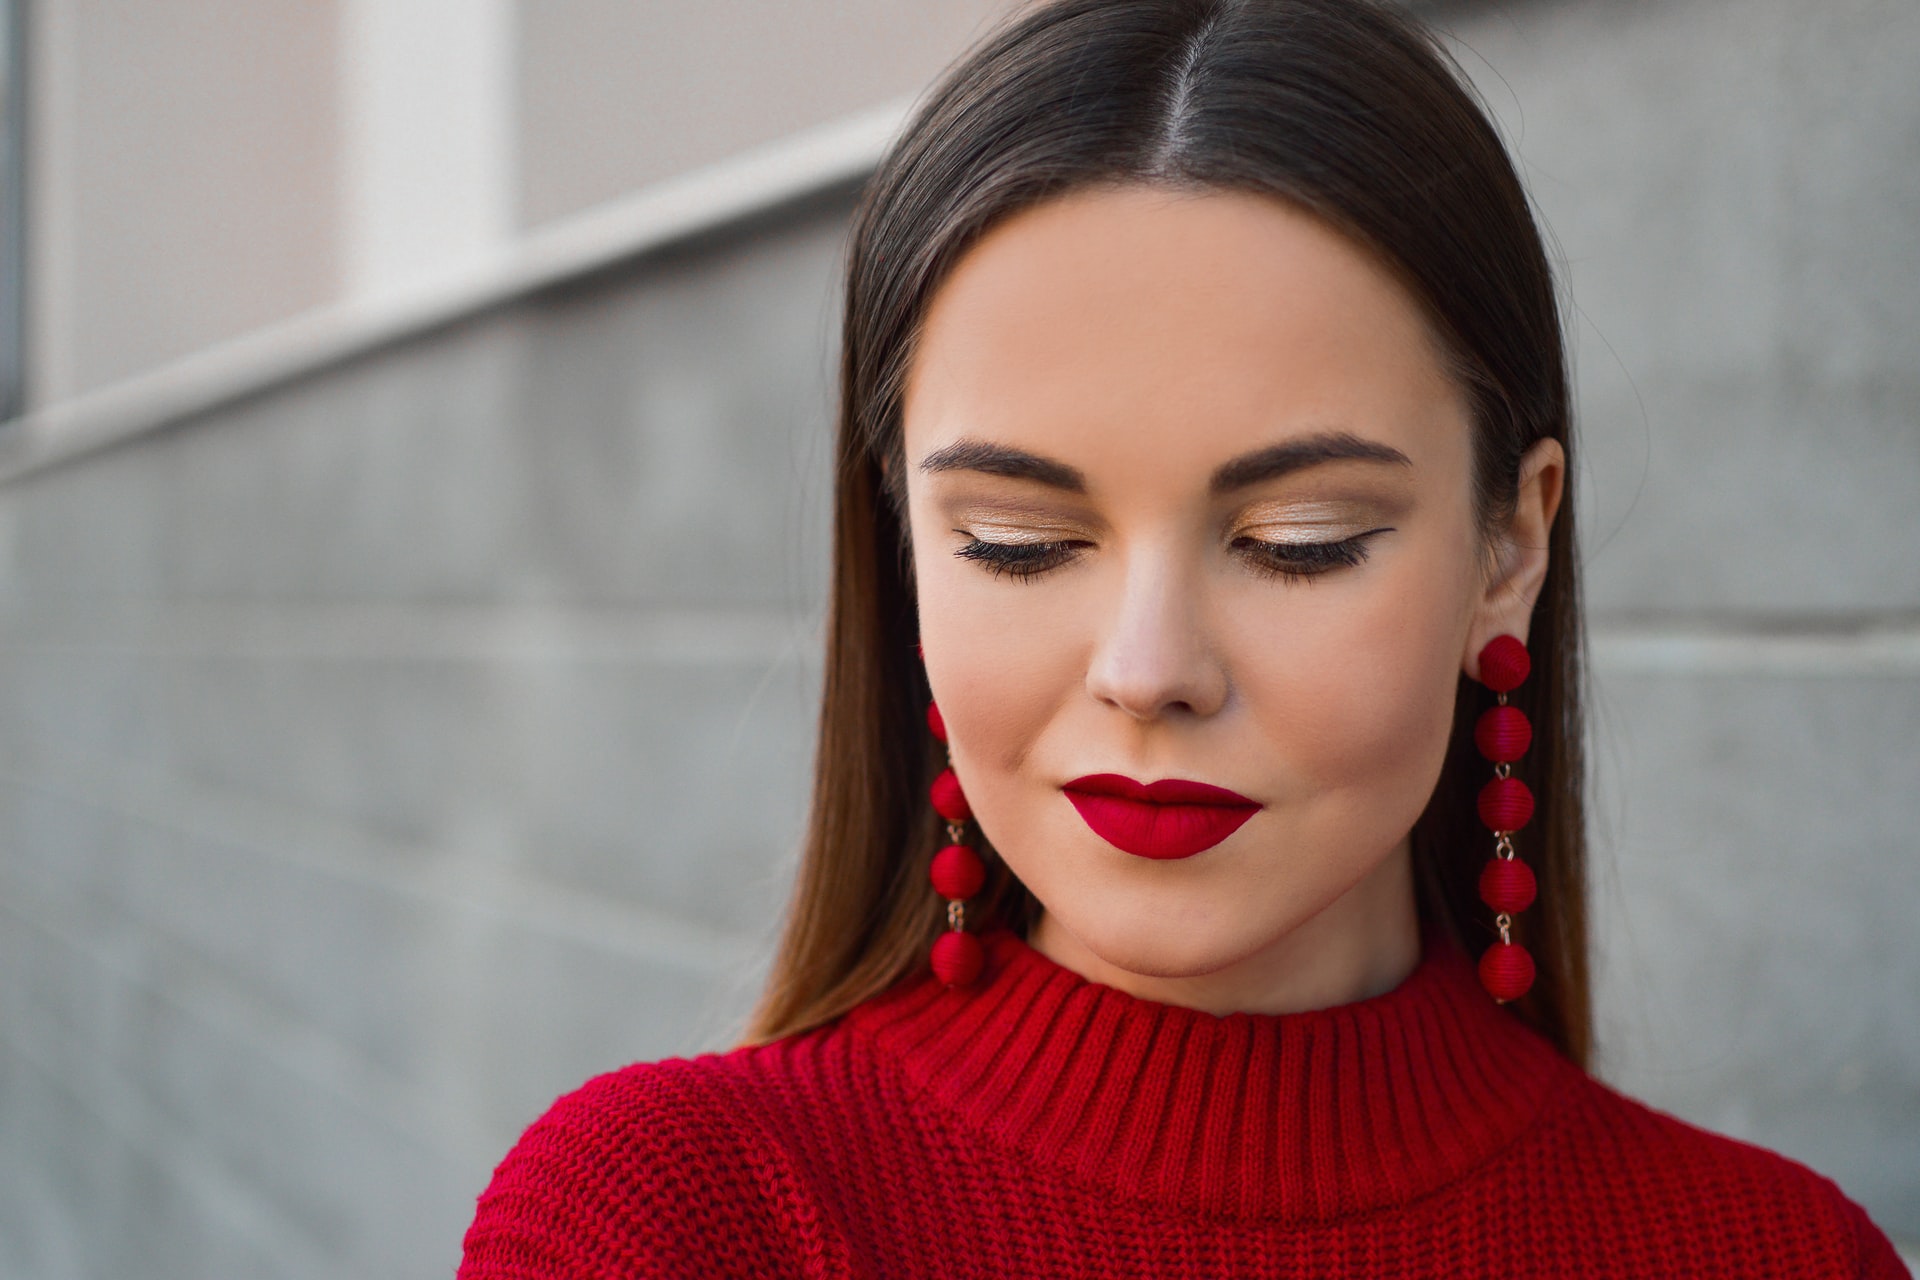 woman with full red lips looks down